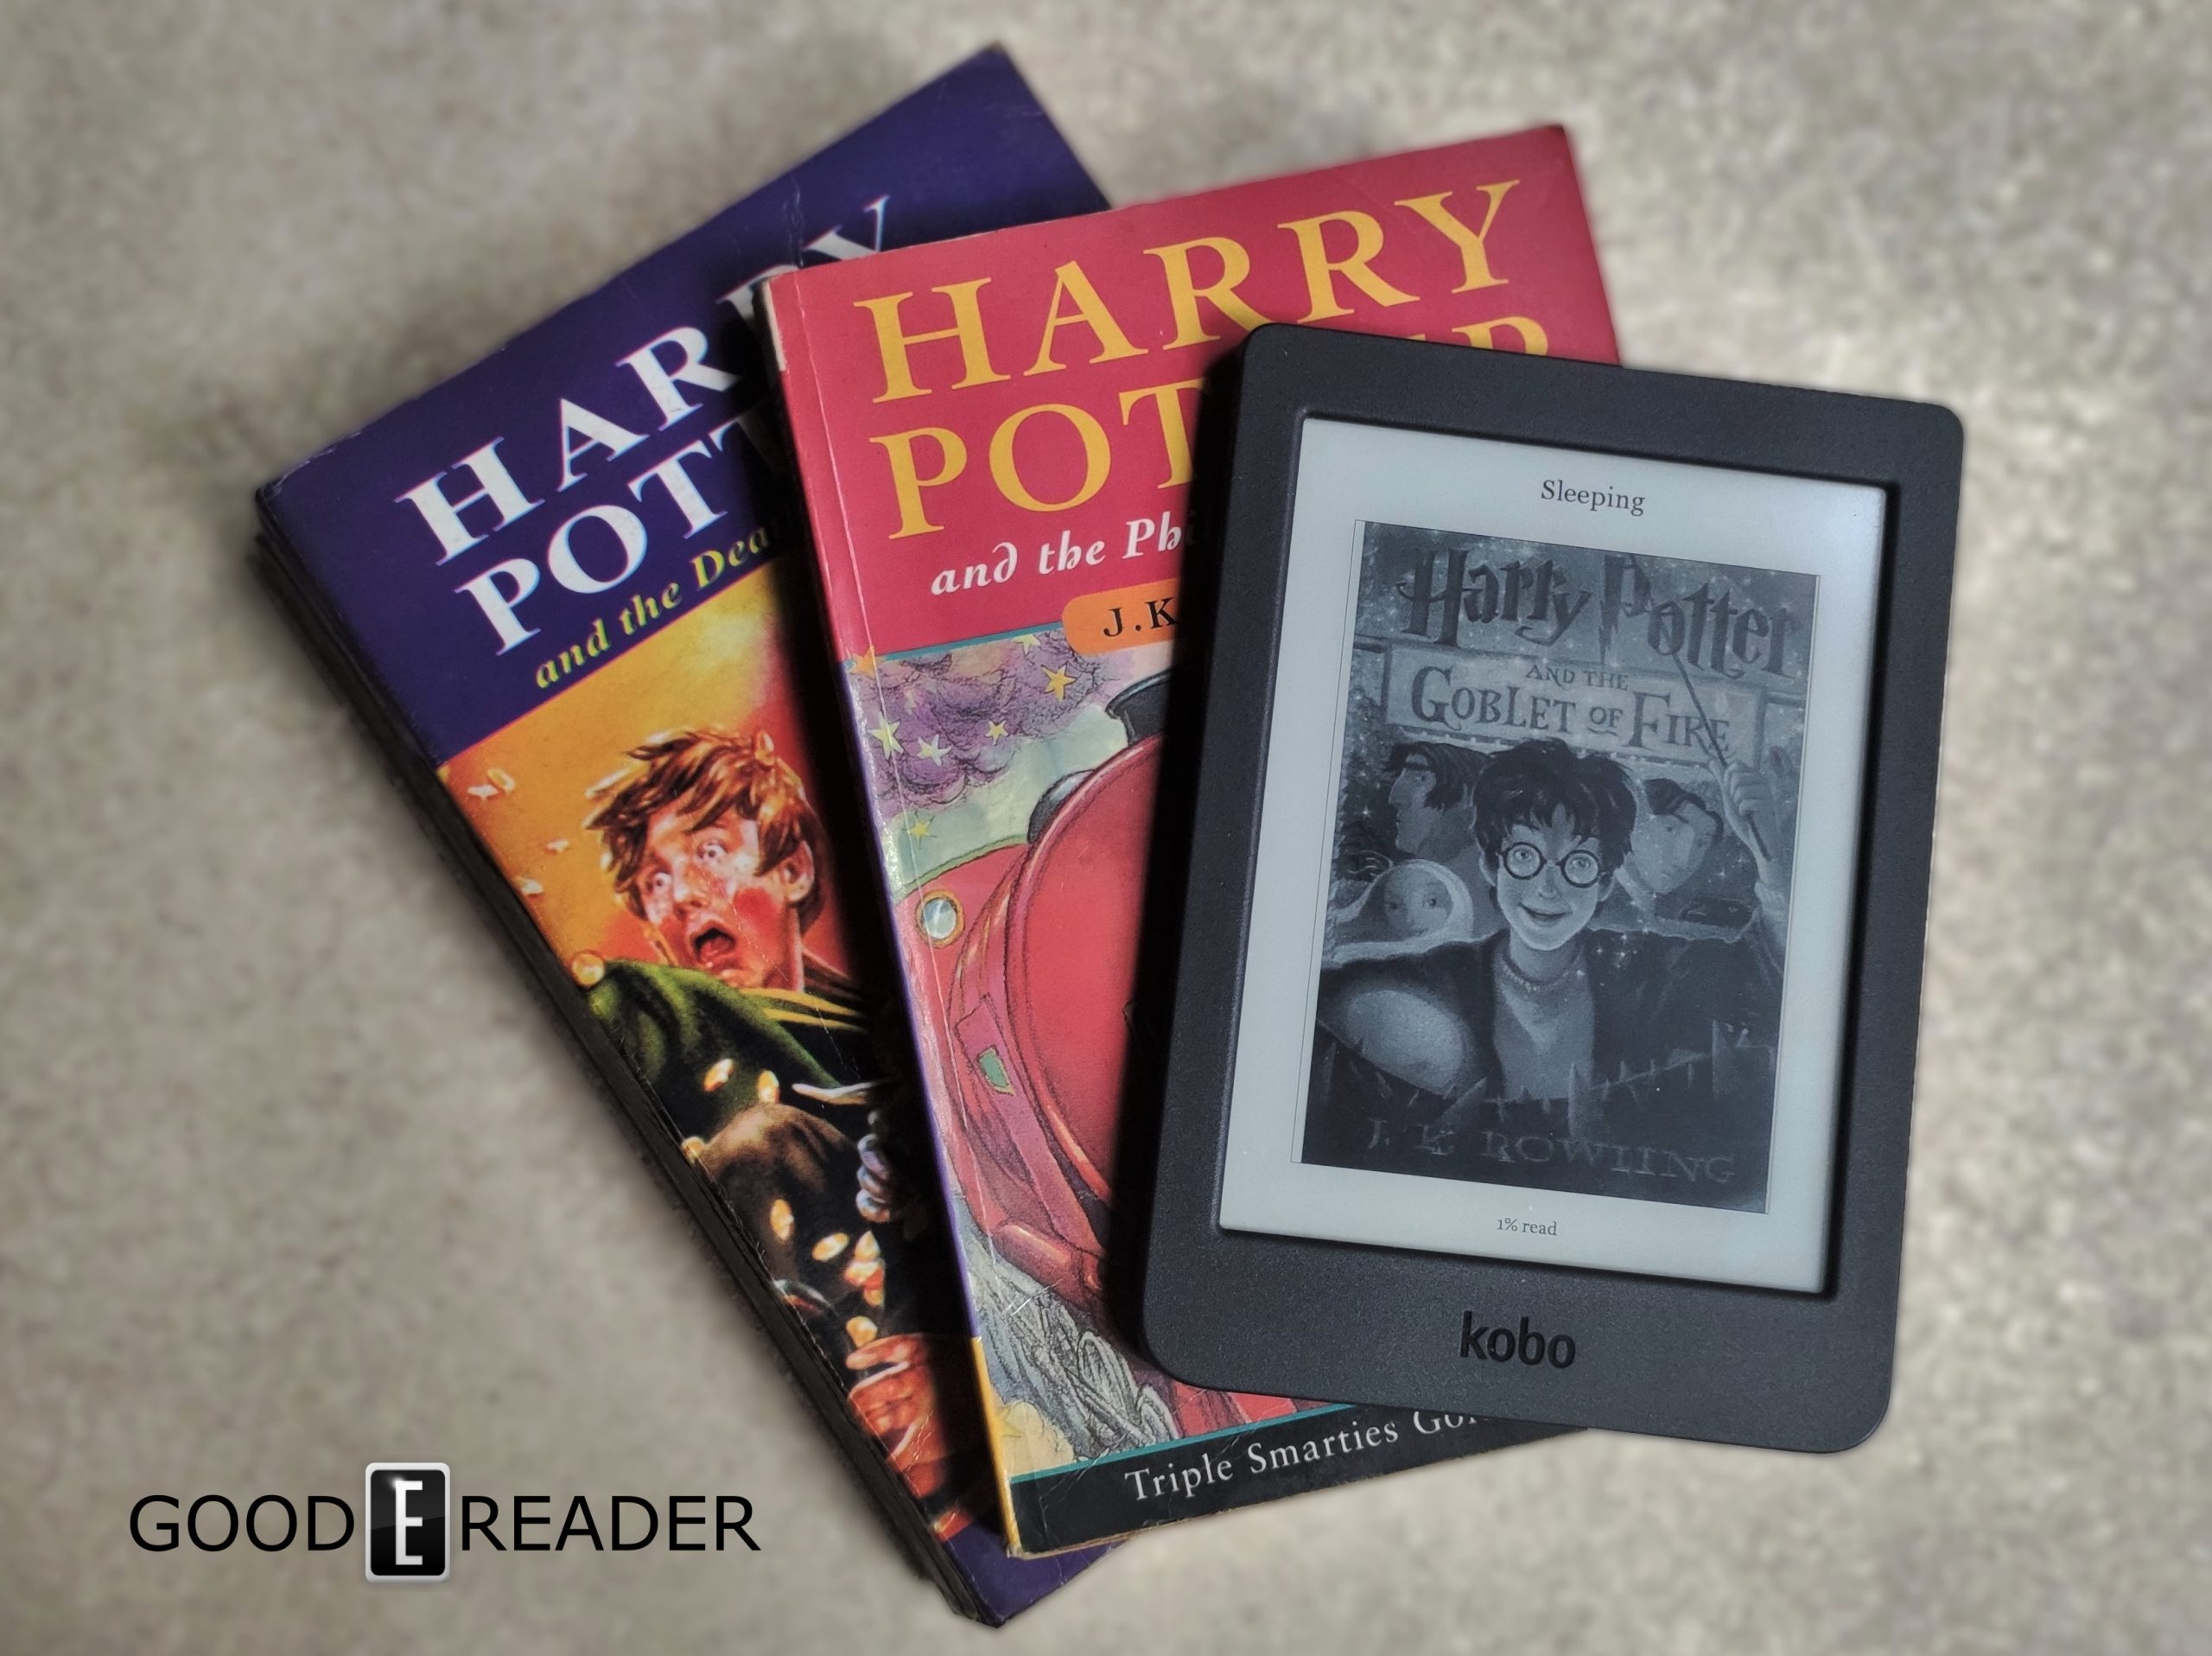 Can I read the Harry Potter books on my e-ink reader with the KyBook Reader app?